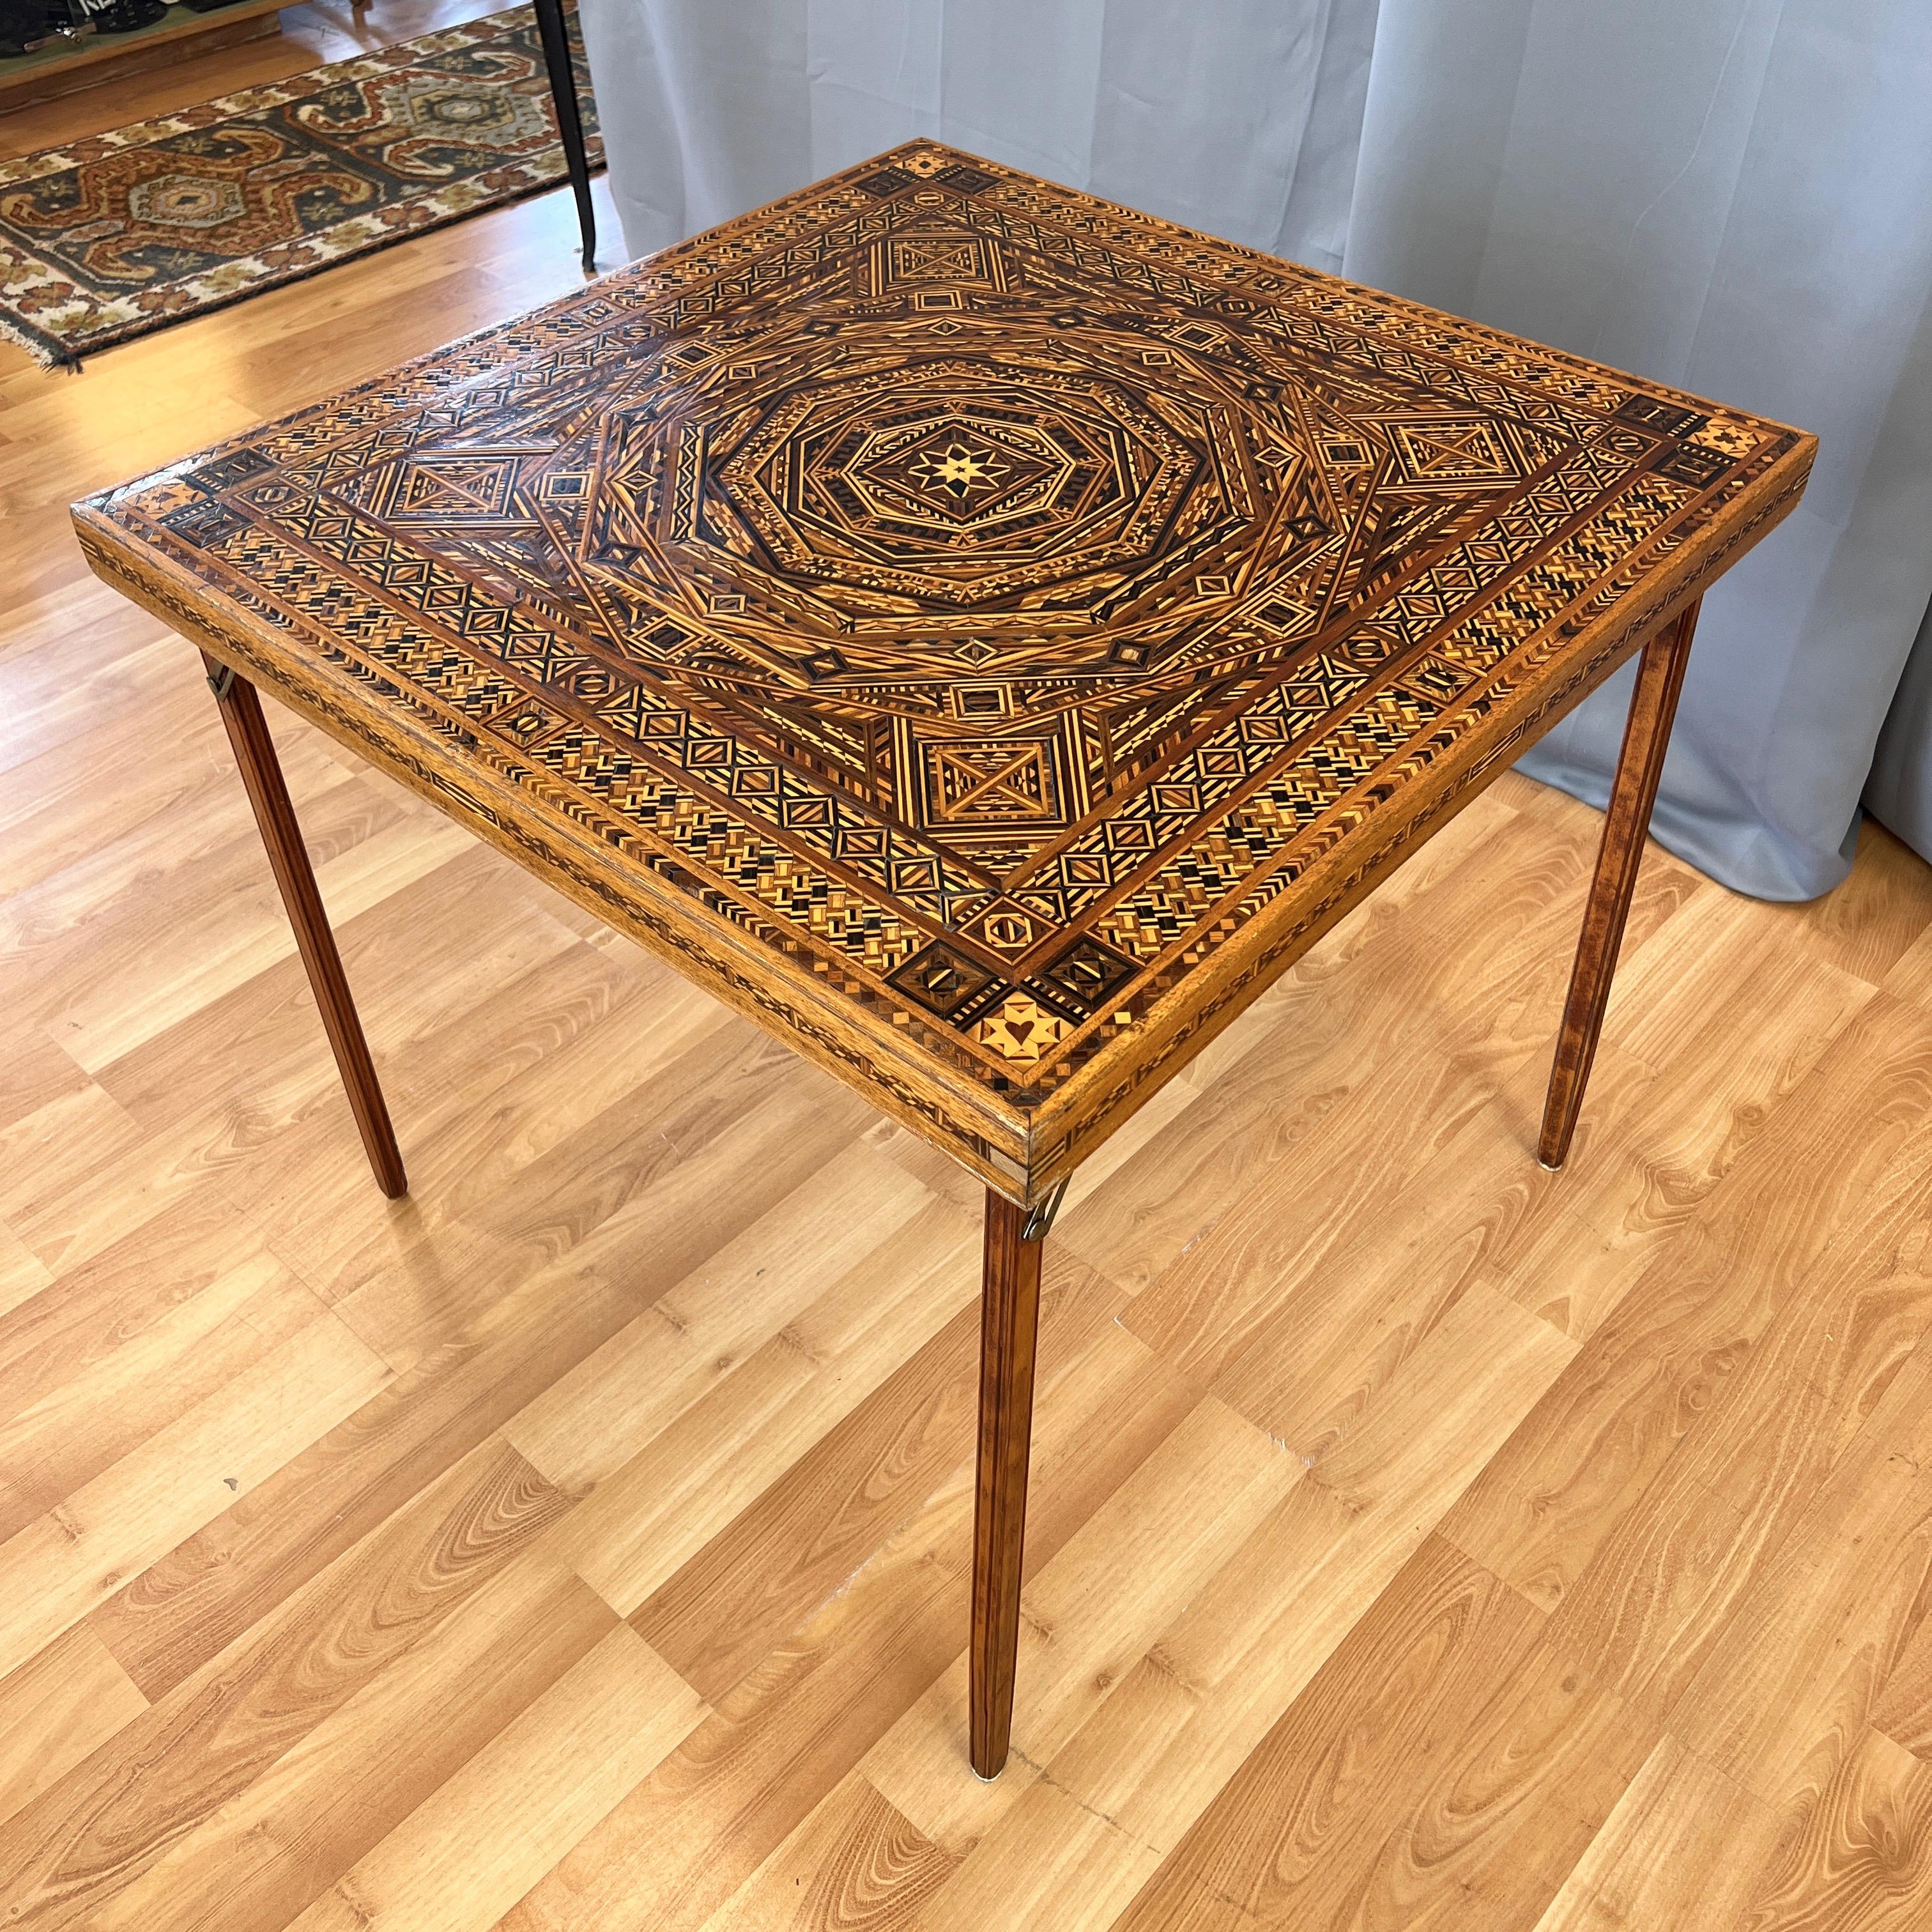 Hand-Crafted Syrian-Style Exceptionally Intricate Wood Marquetry Folding Card Table, 1930s For Sale